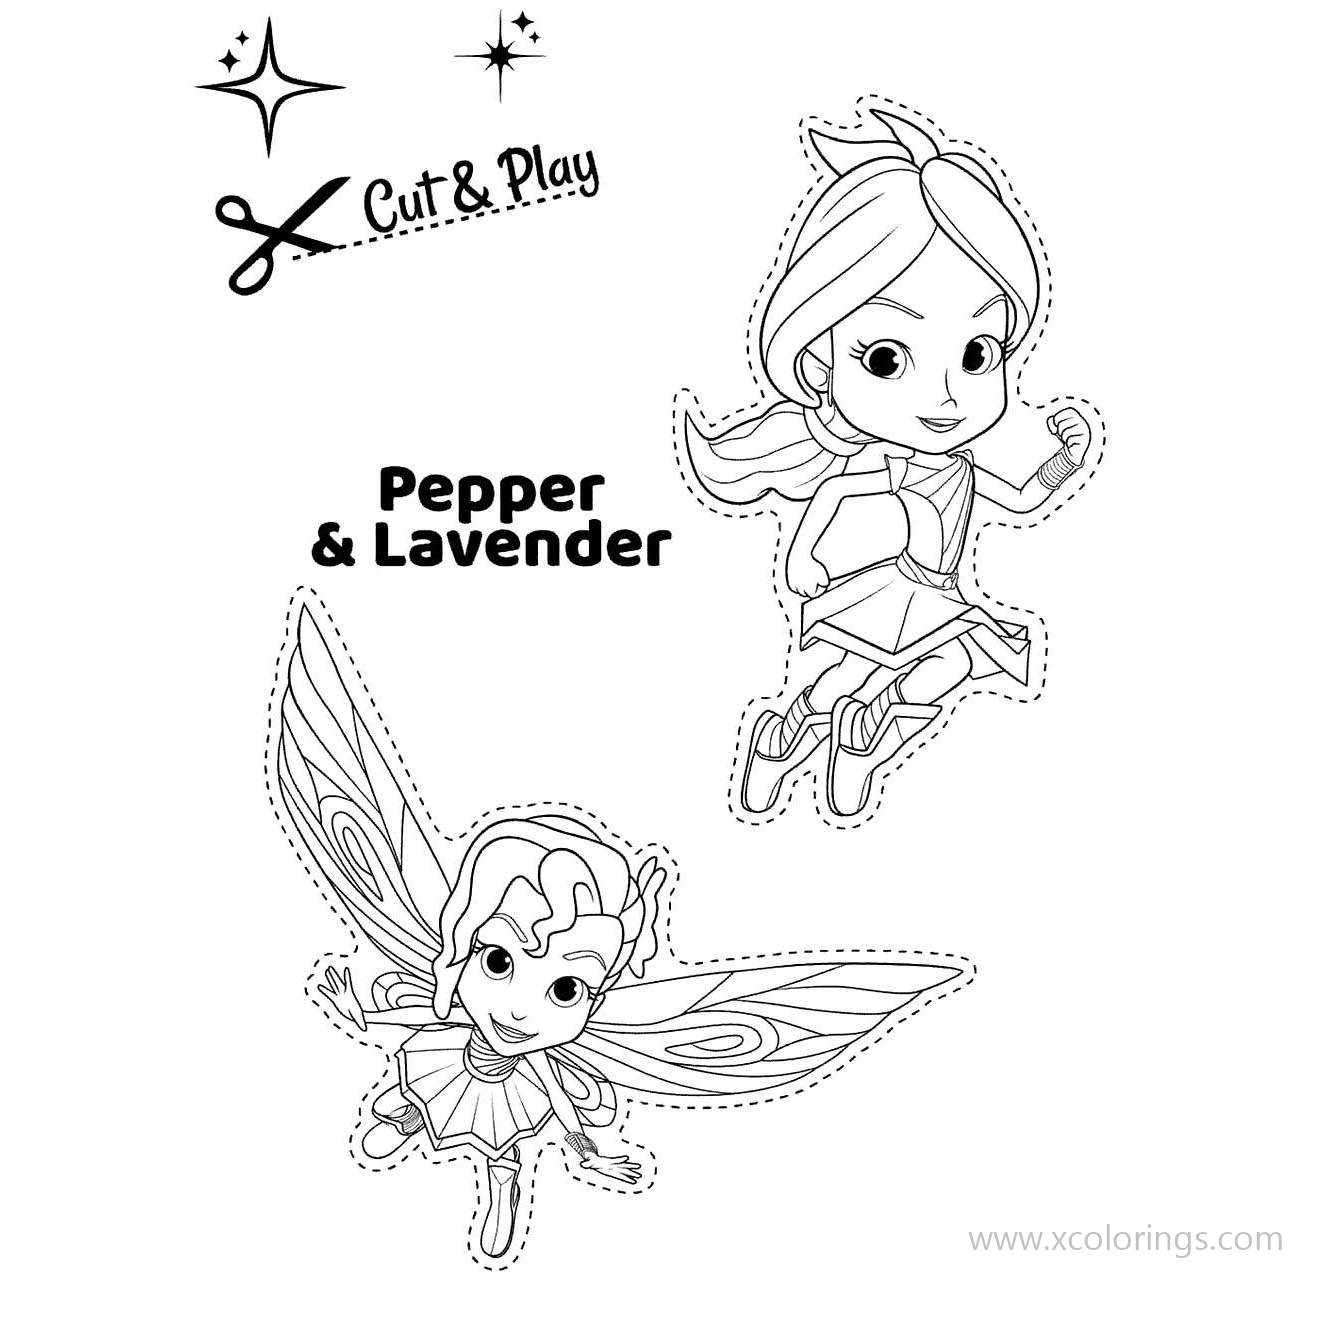 Free Rainbow Rangers Coloring Pages Pepper and Lavendel printable